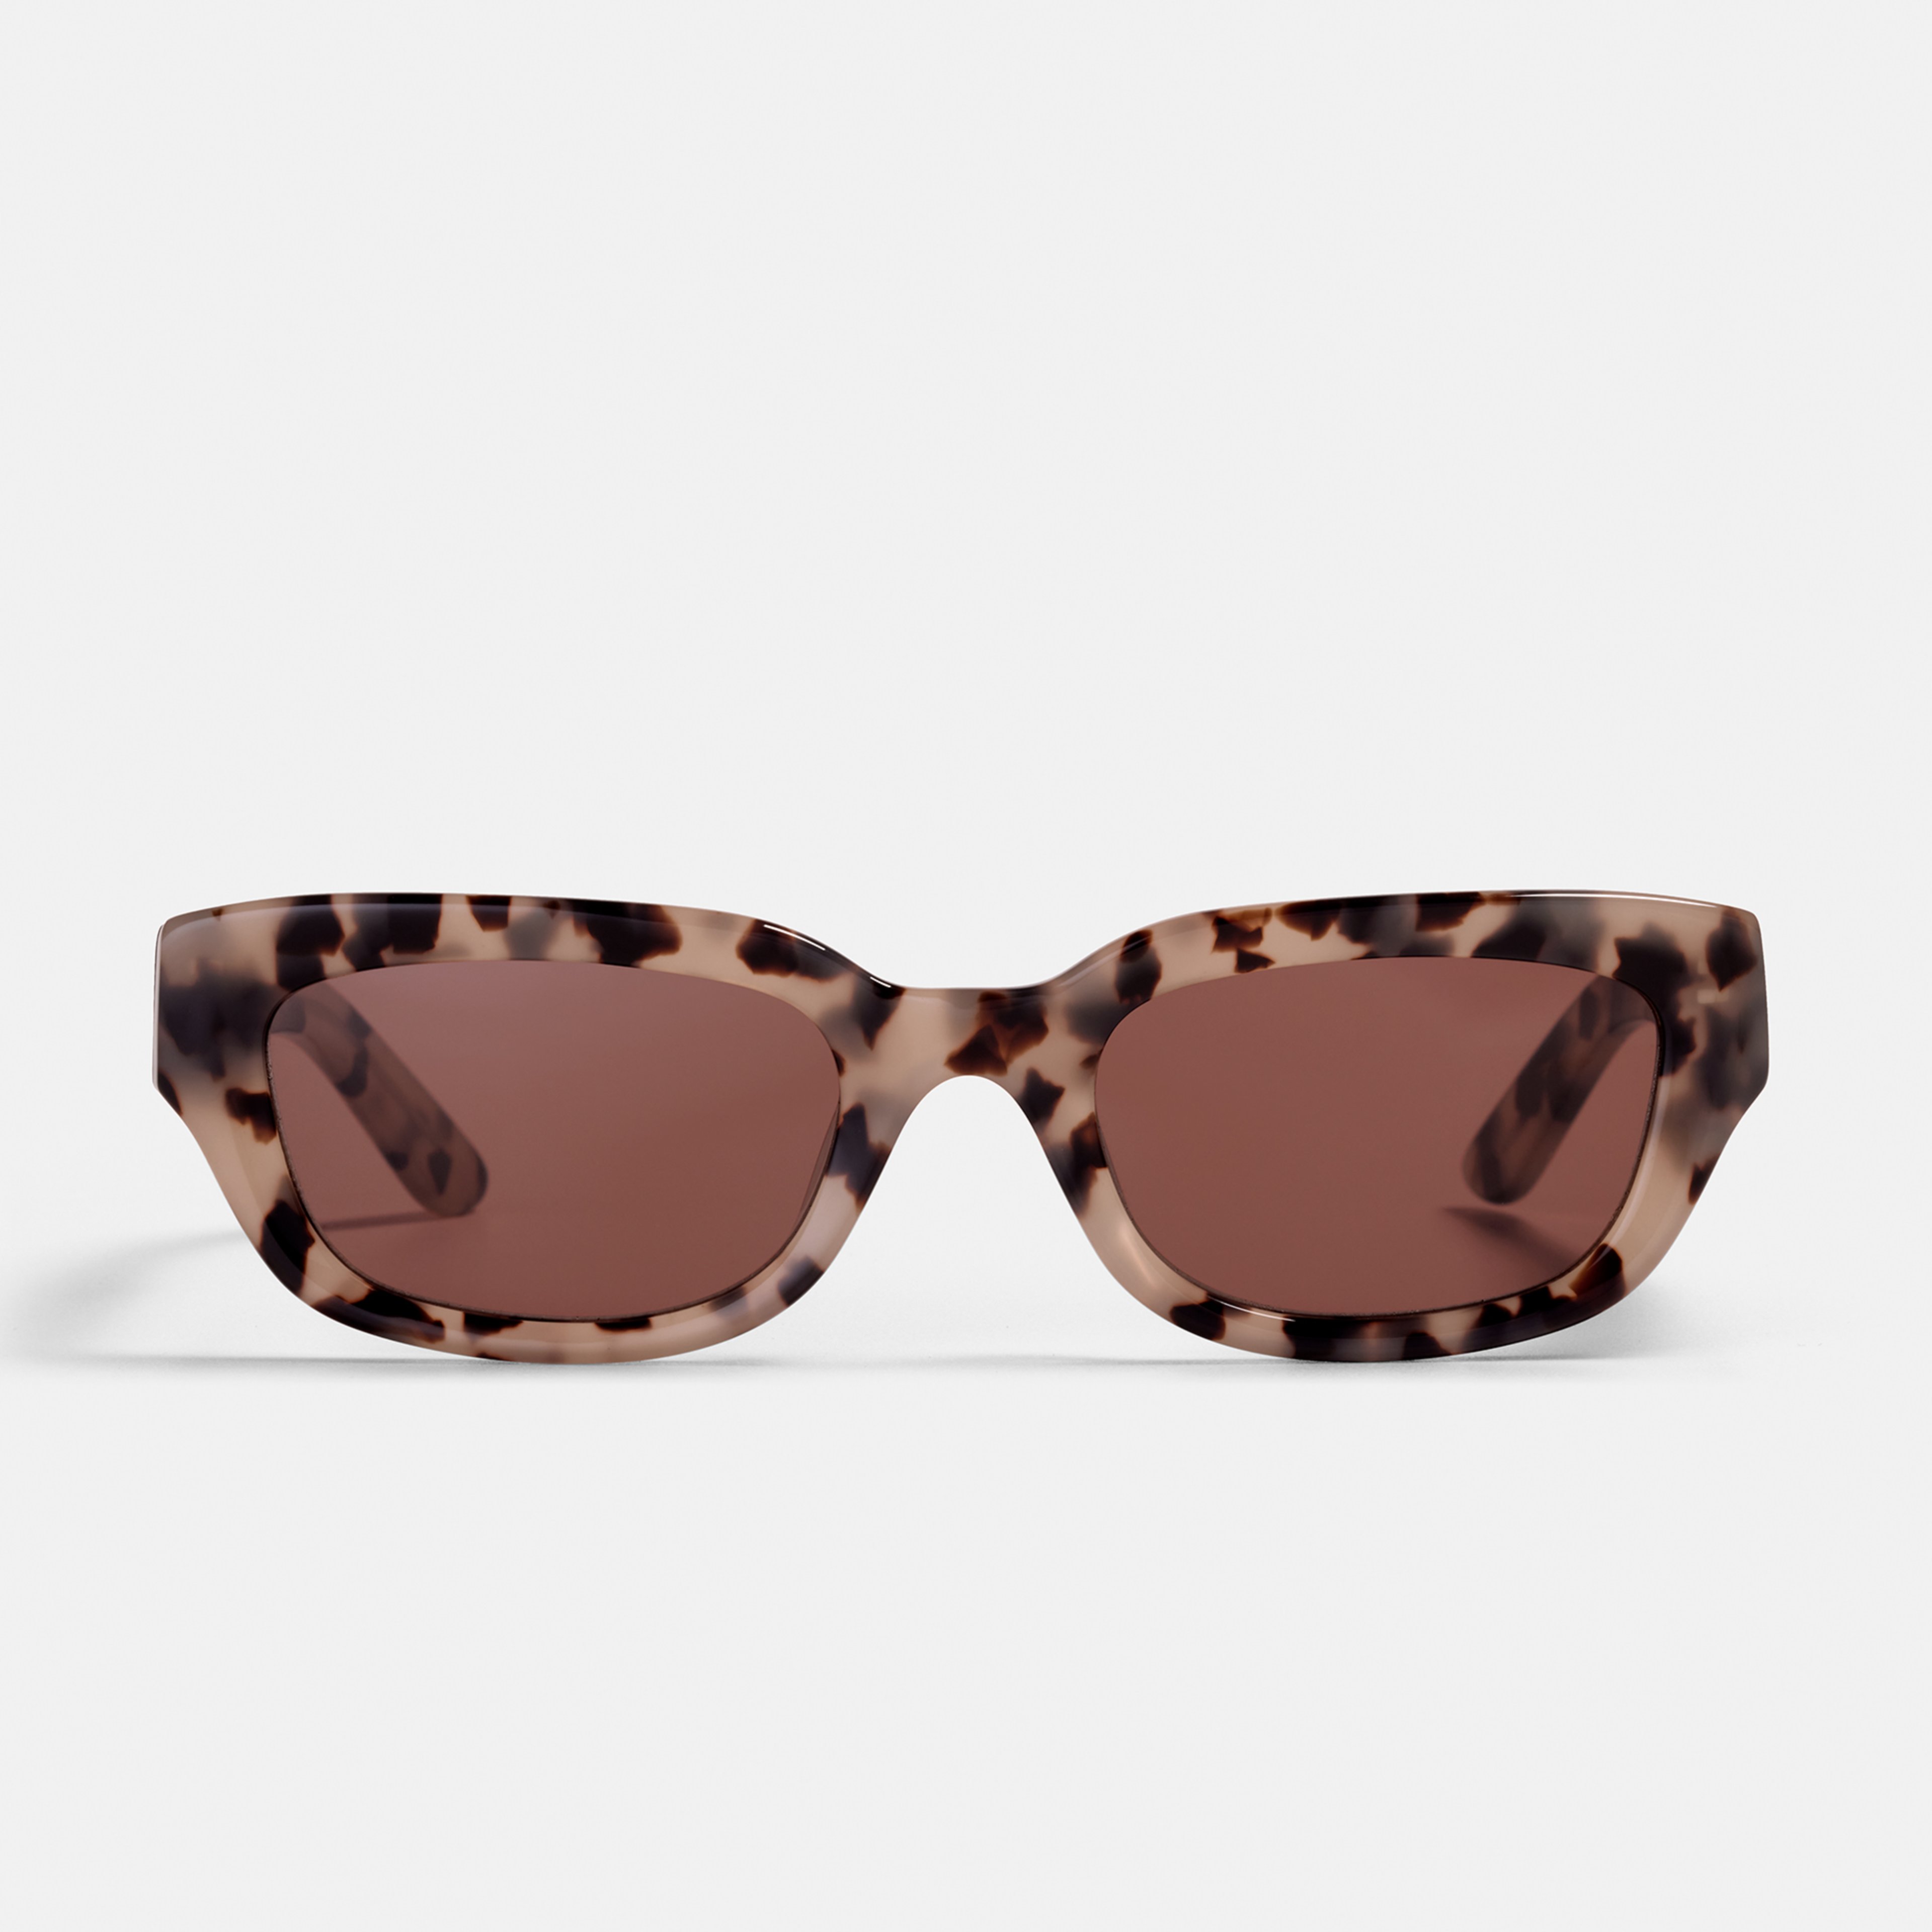 Ace & Tate Solaires | rectangulaire Bio-acétate in Beige, Marron